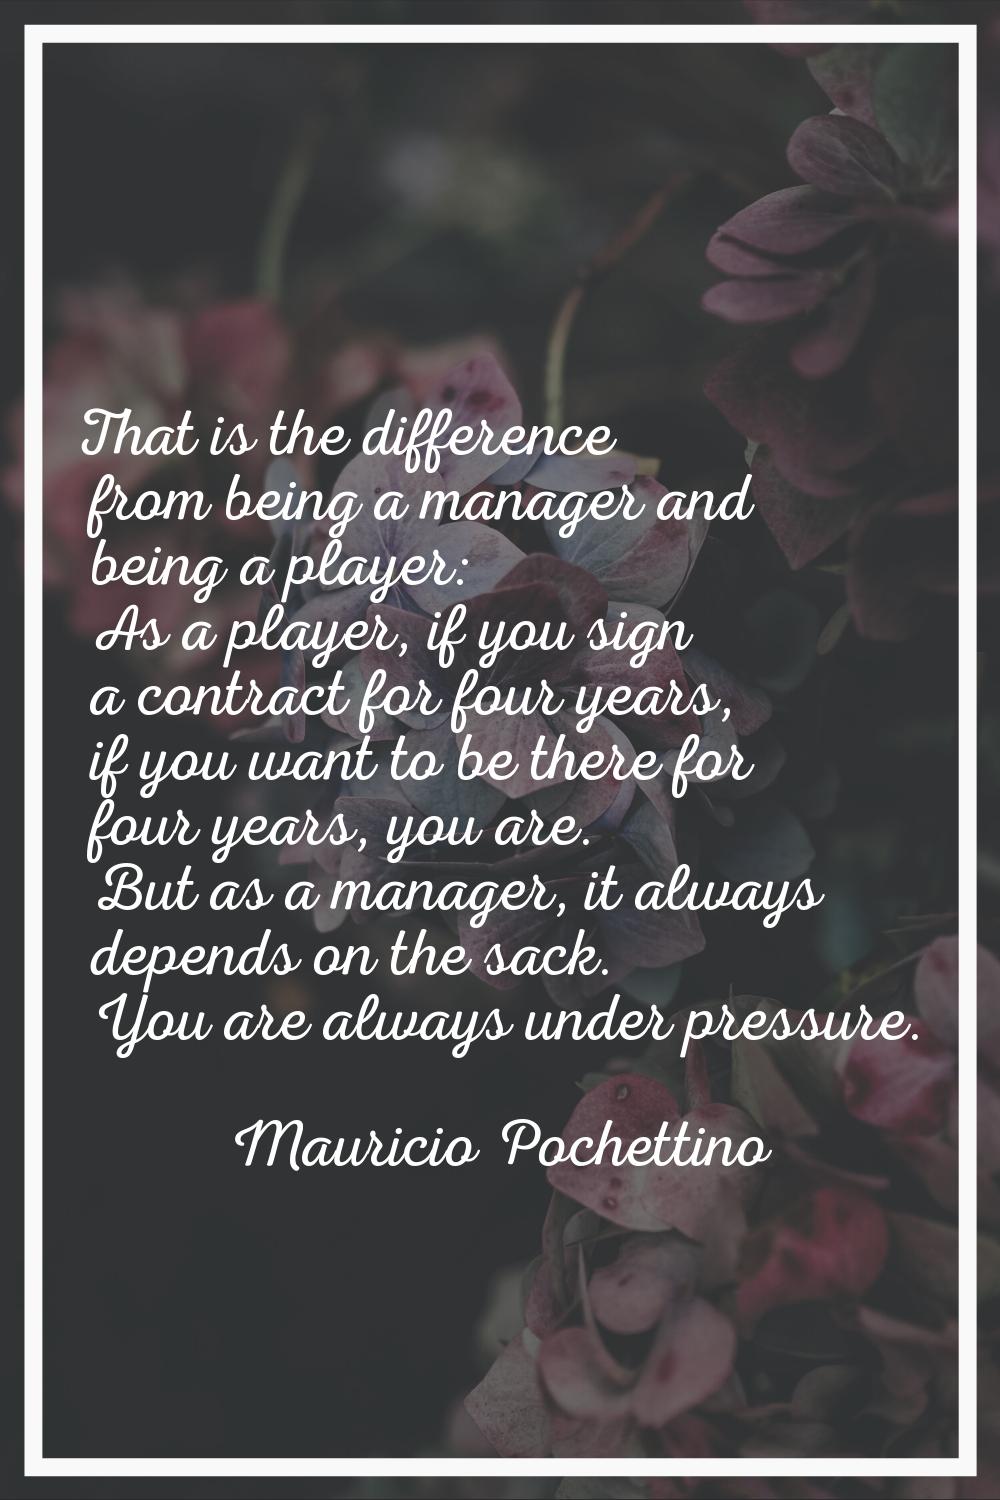 That is the difference from being a manager and being a player: As a player, if you sign a contract